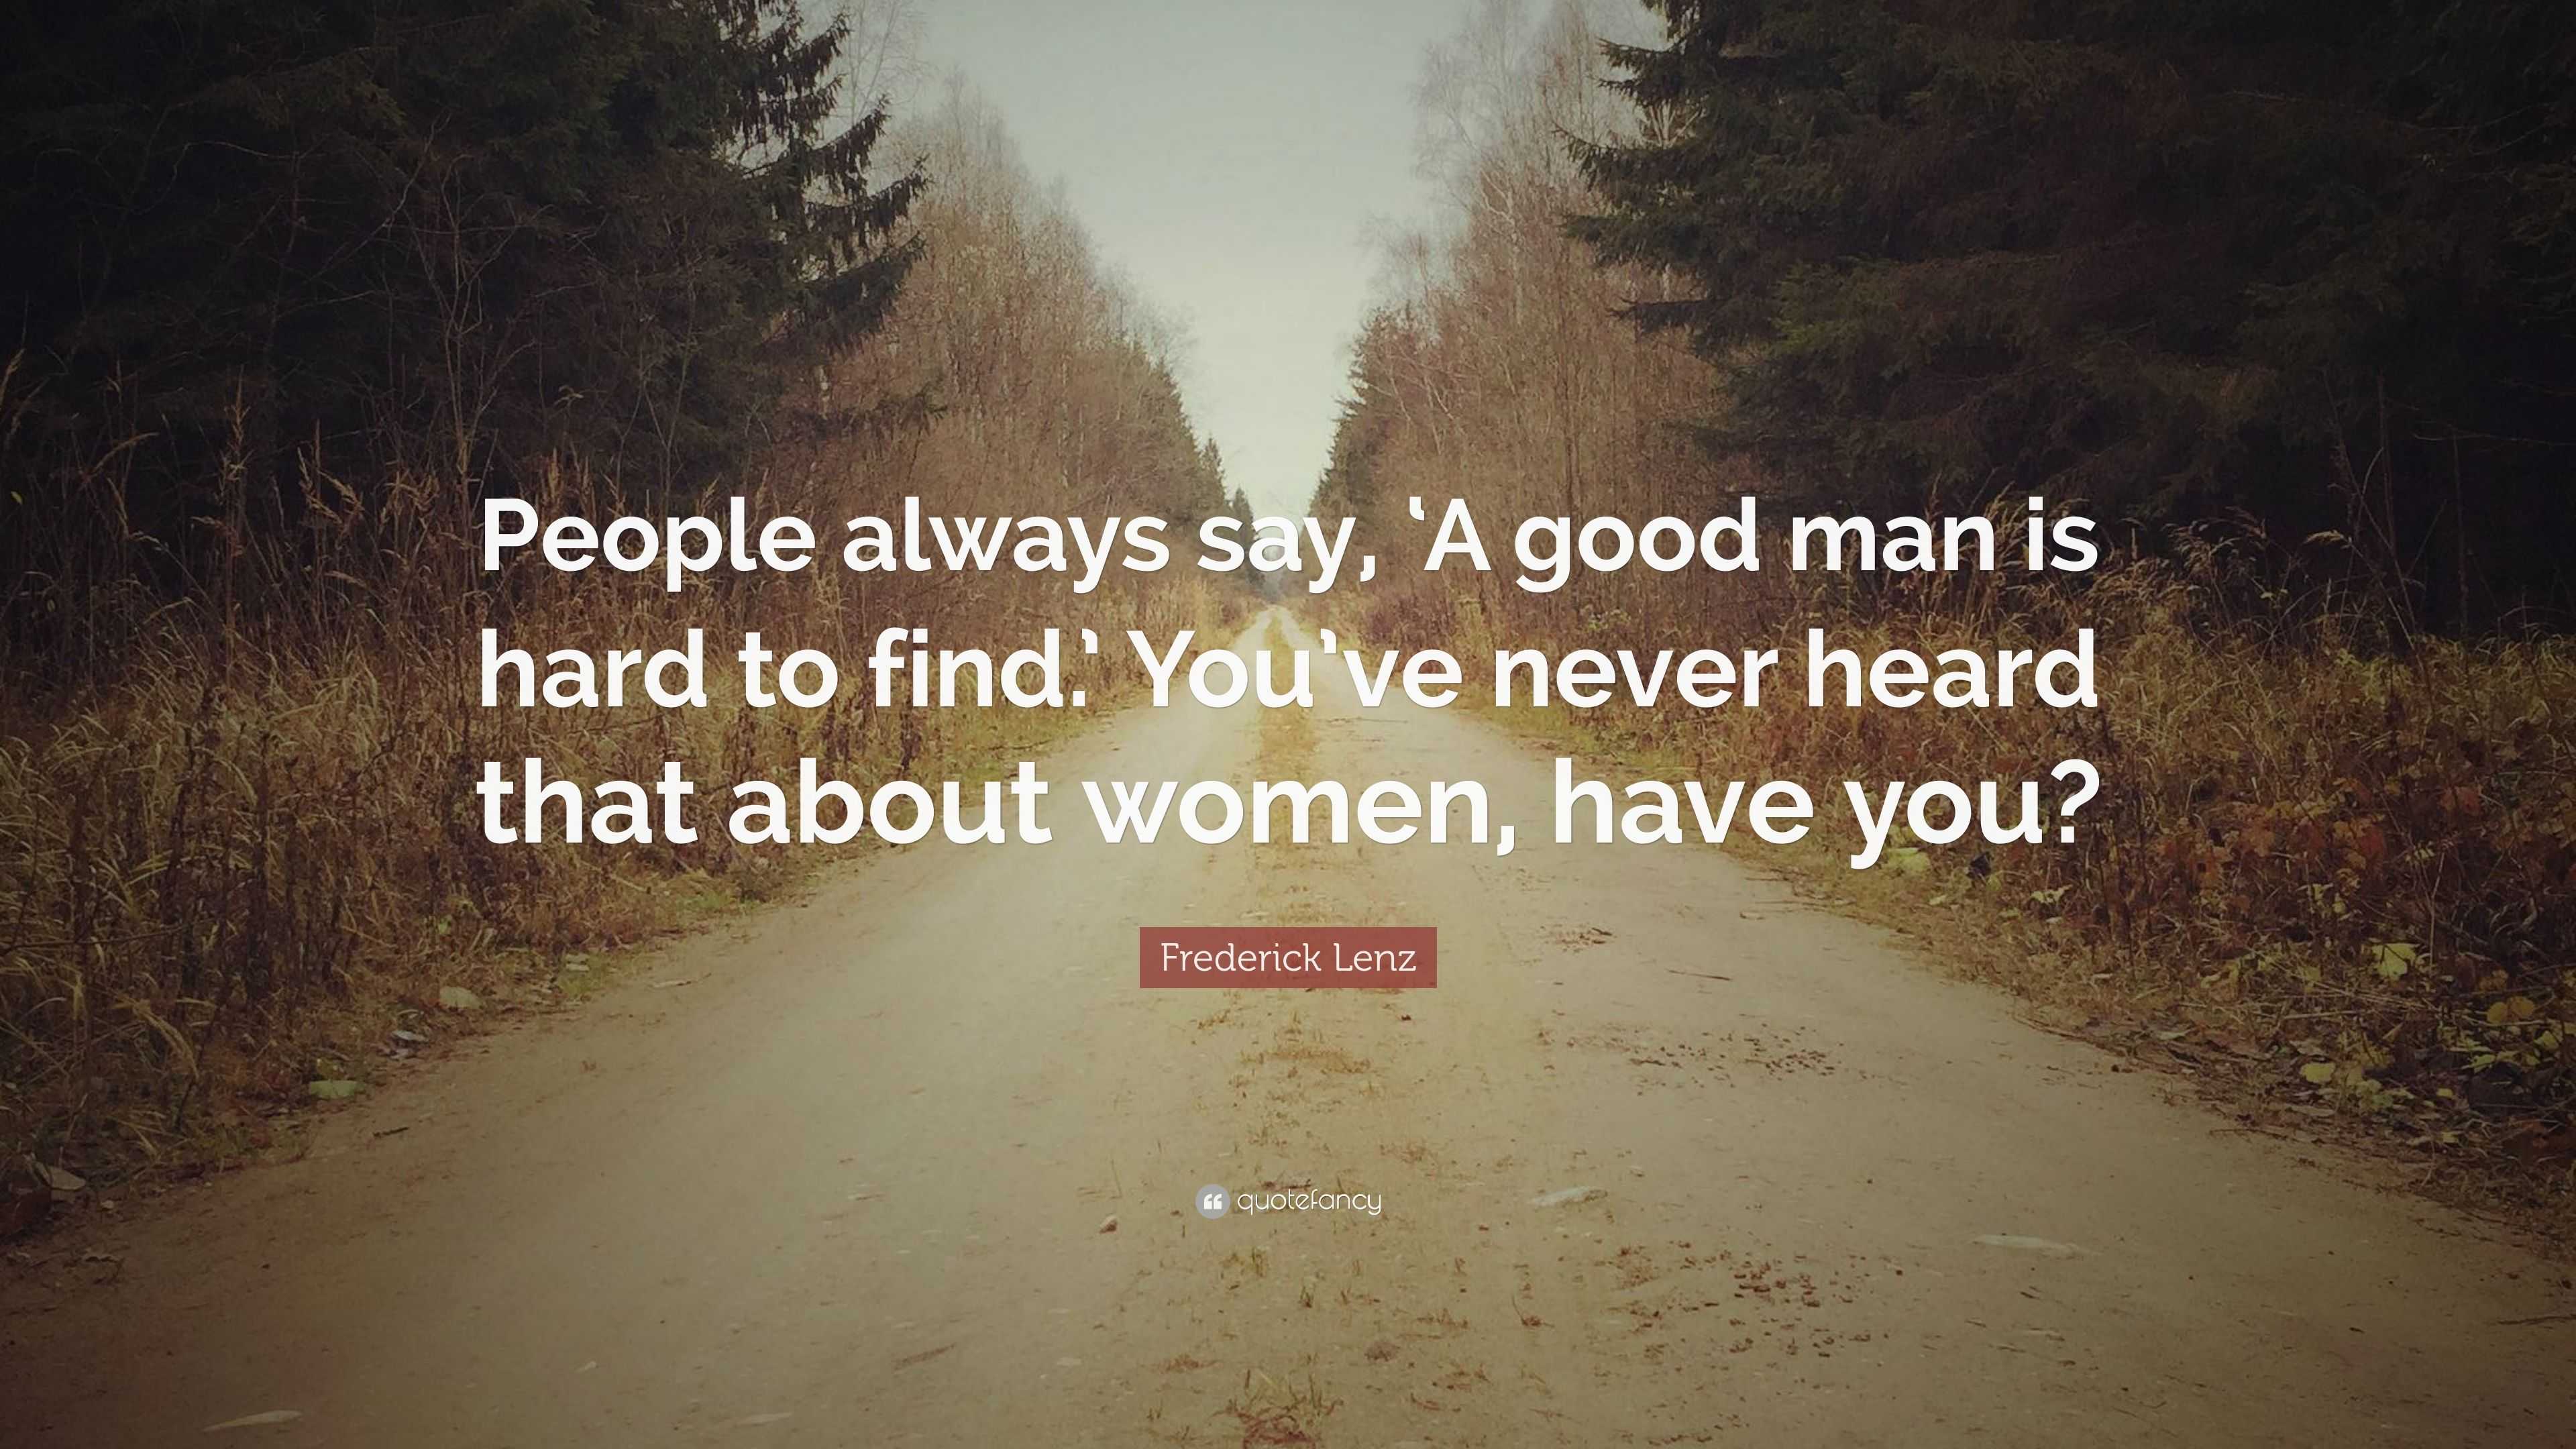 Get Book A good man is hard to find quotes Free